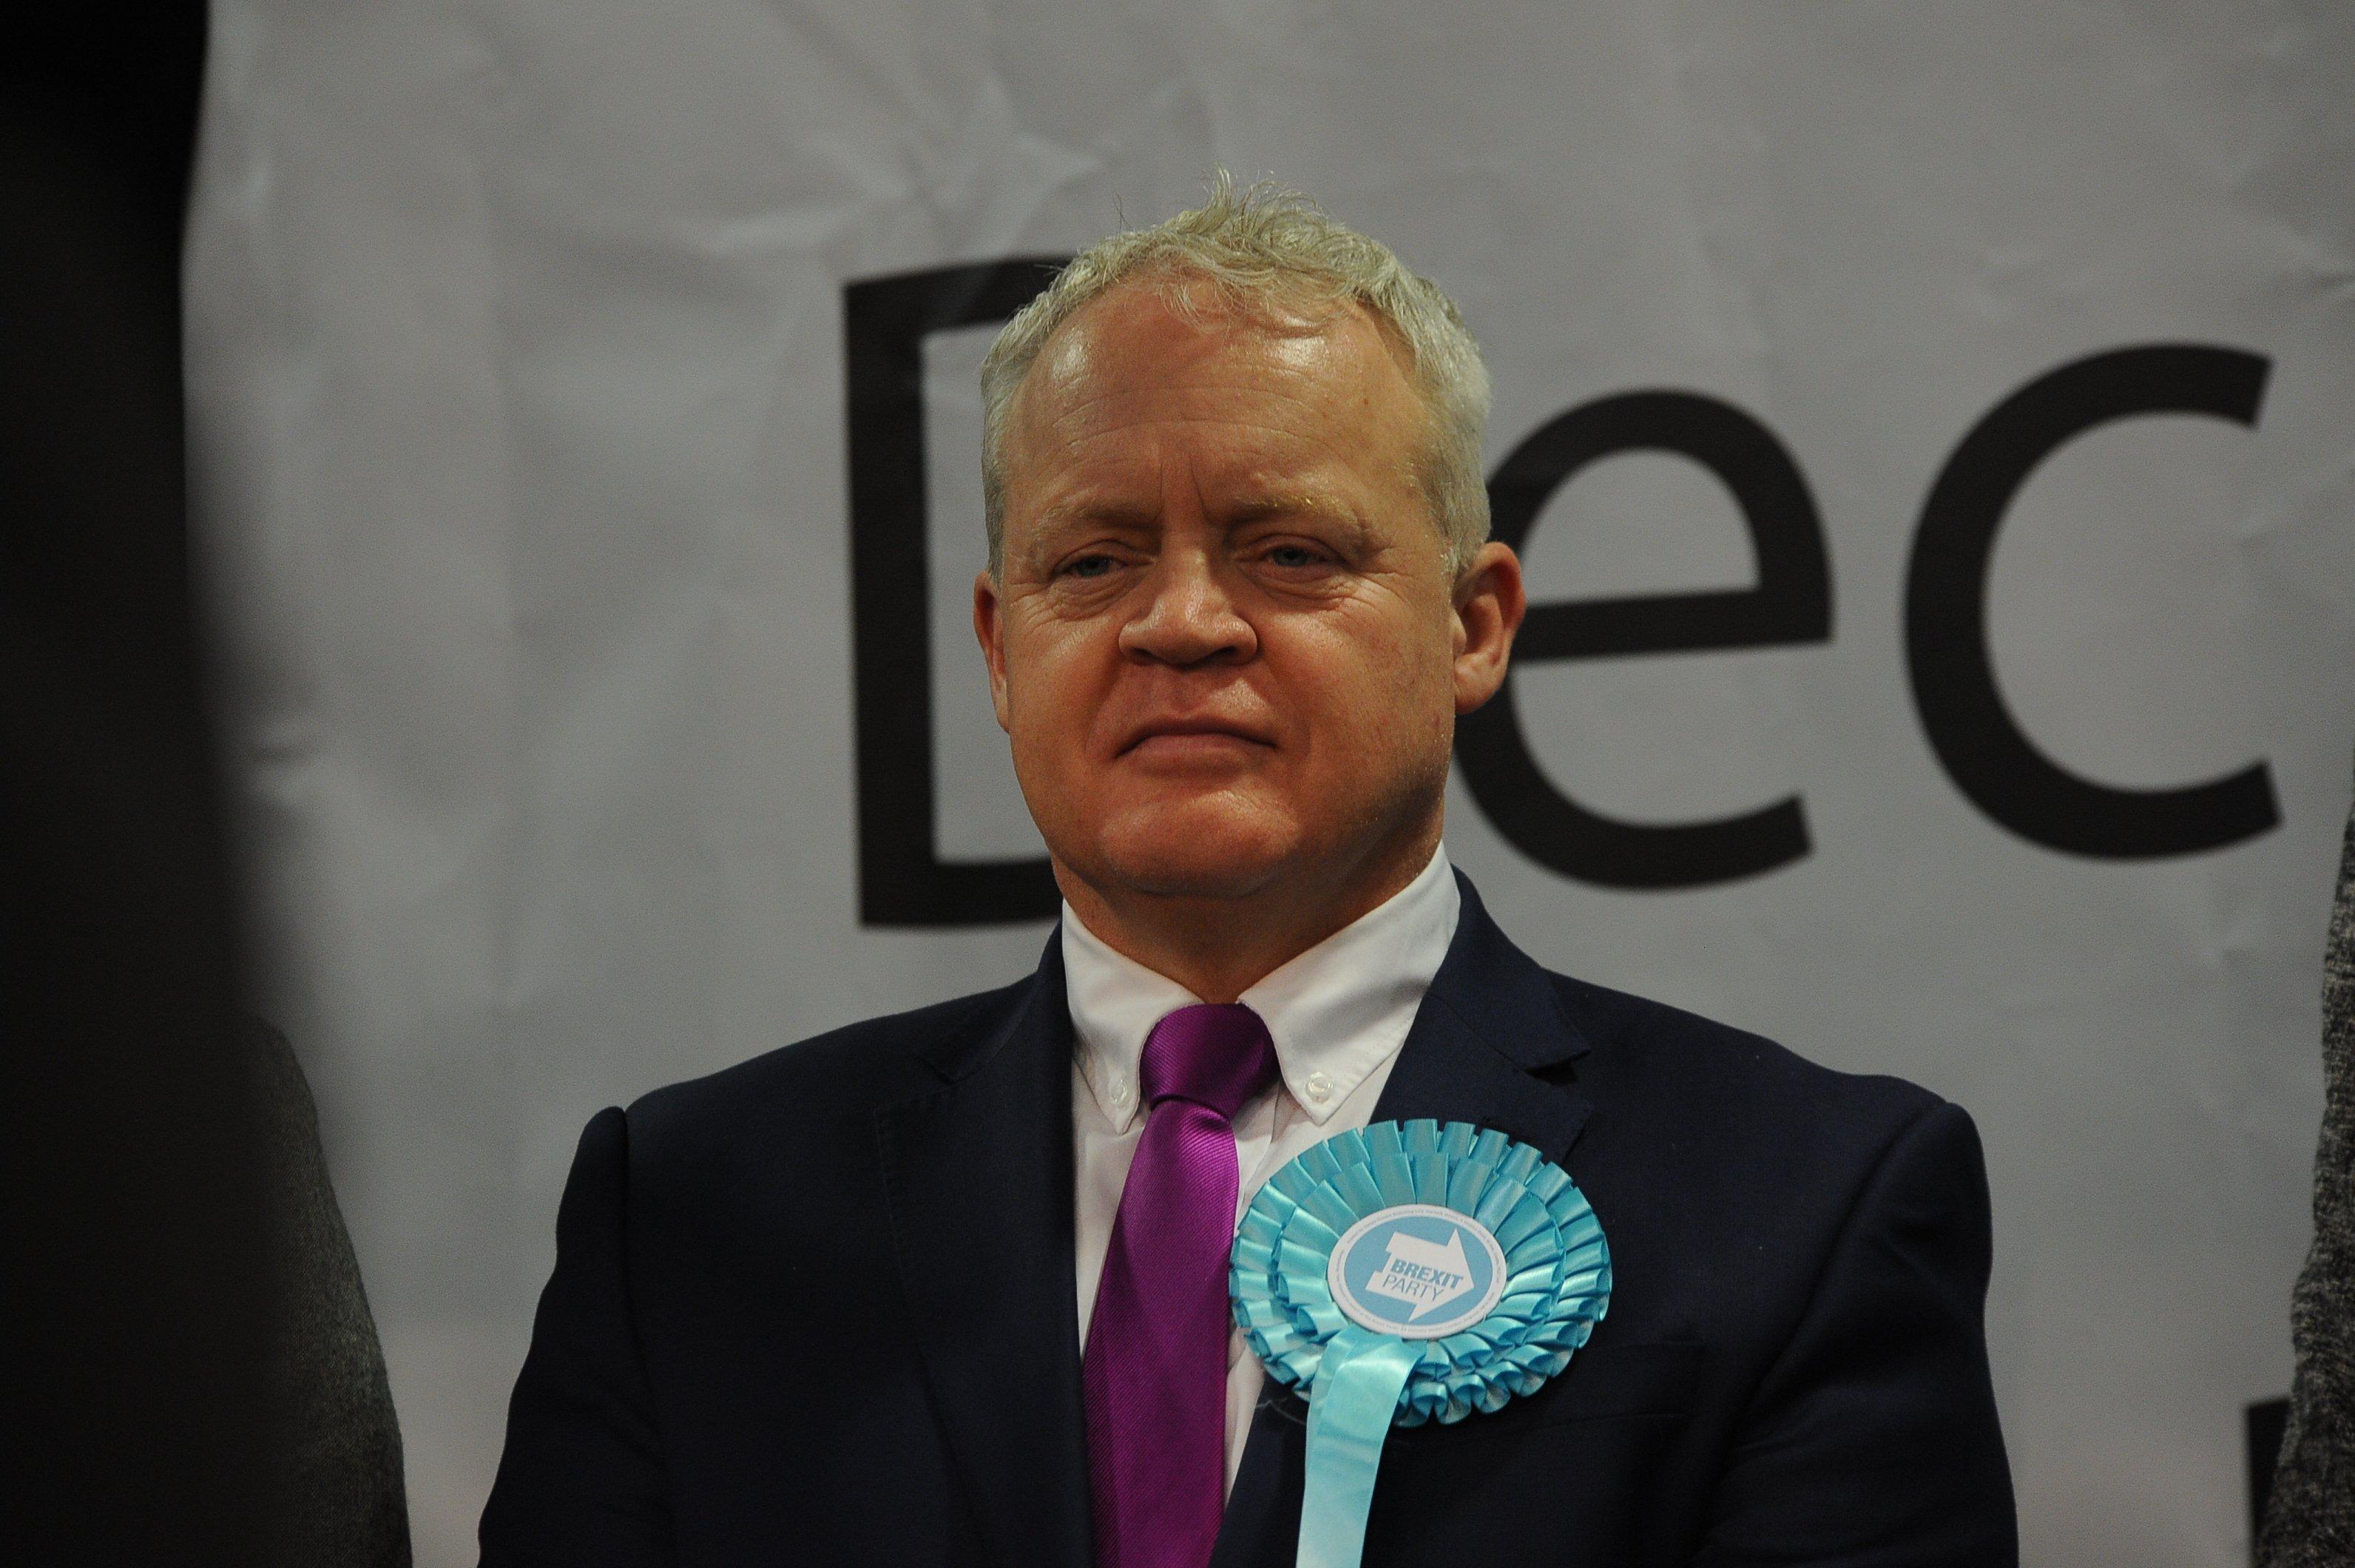 Brexit Party candidate Mike Greene